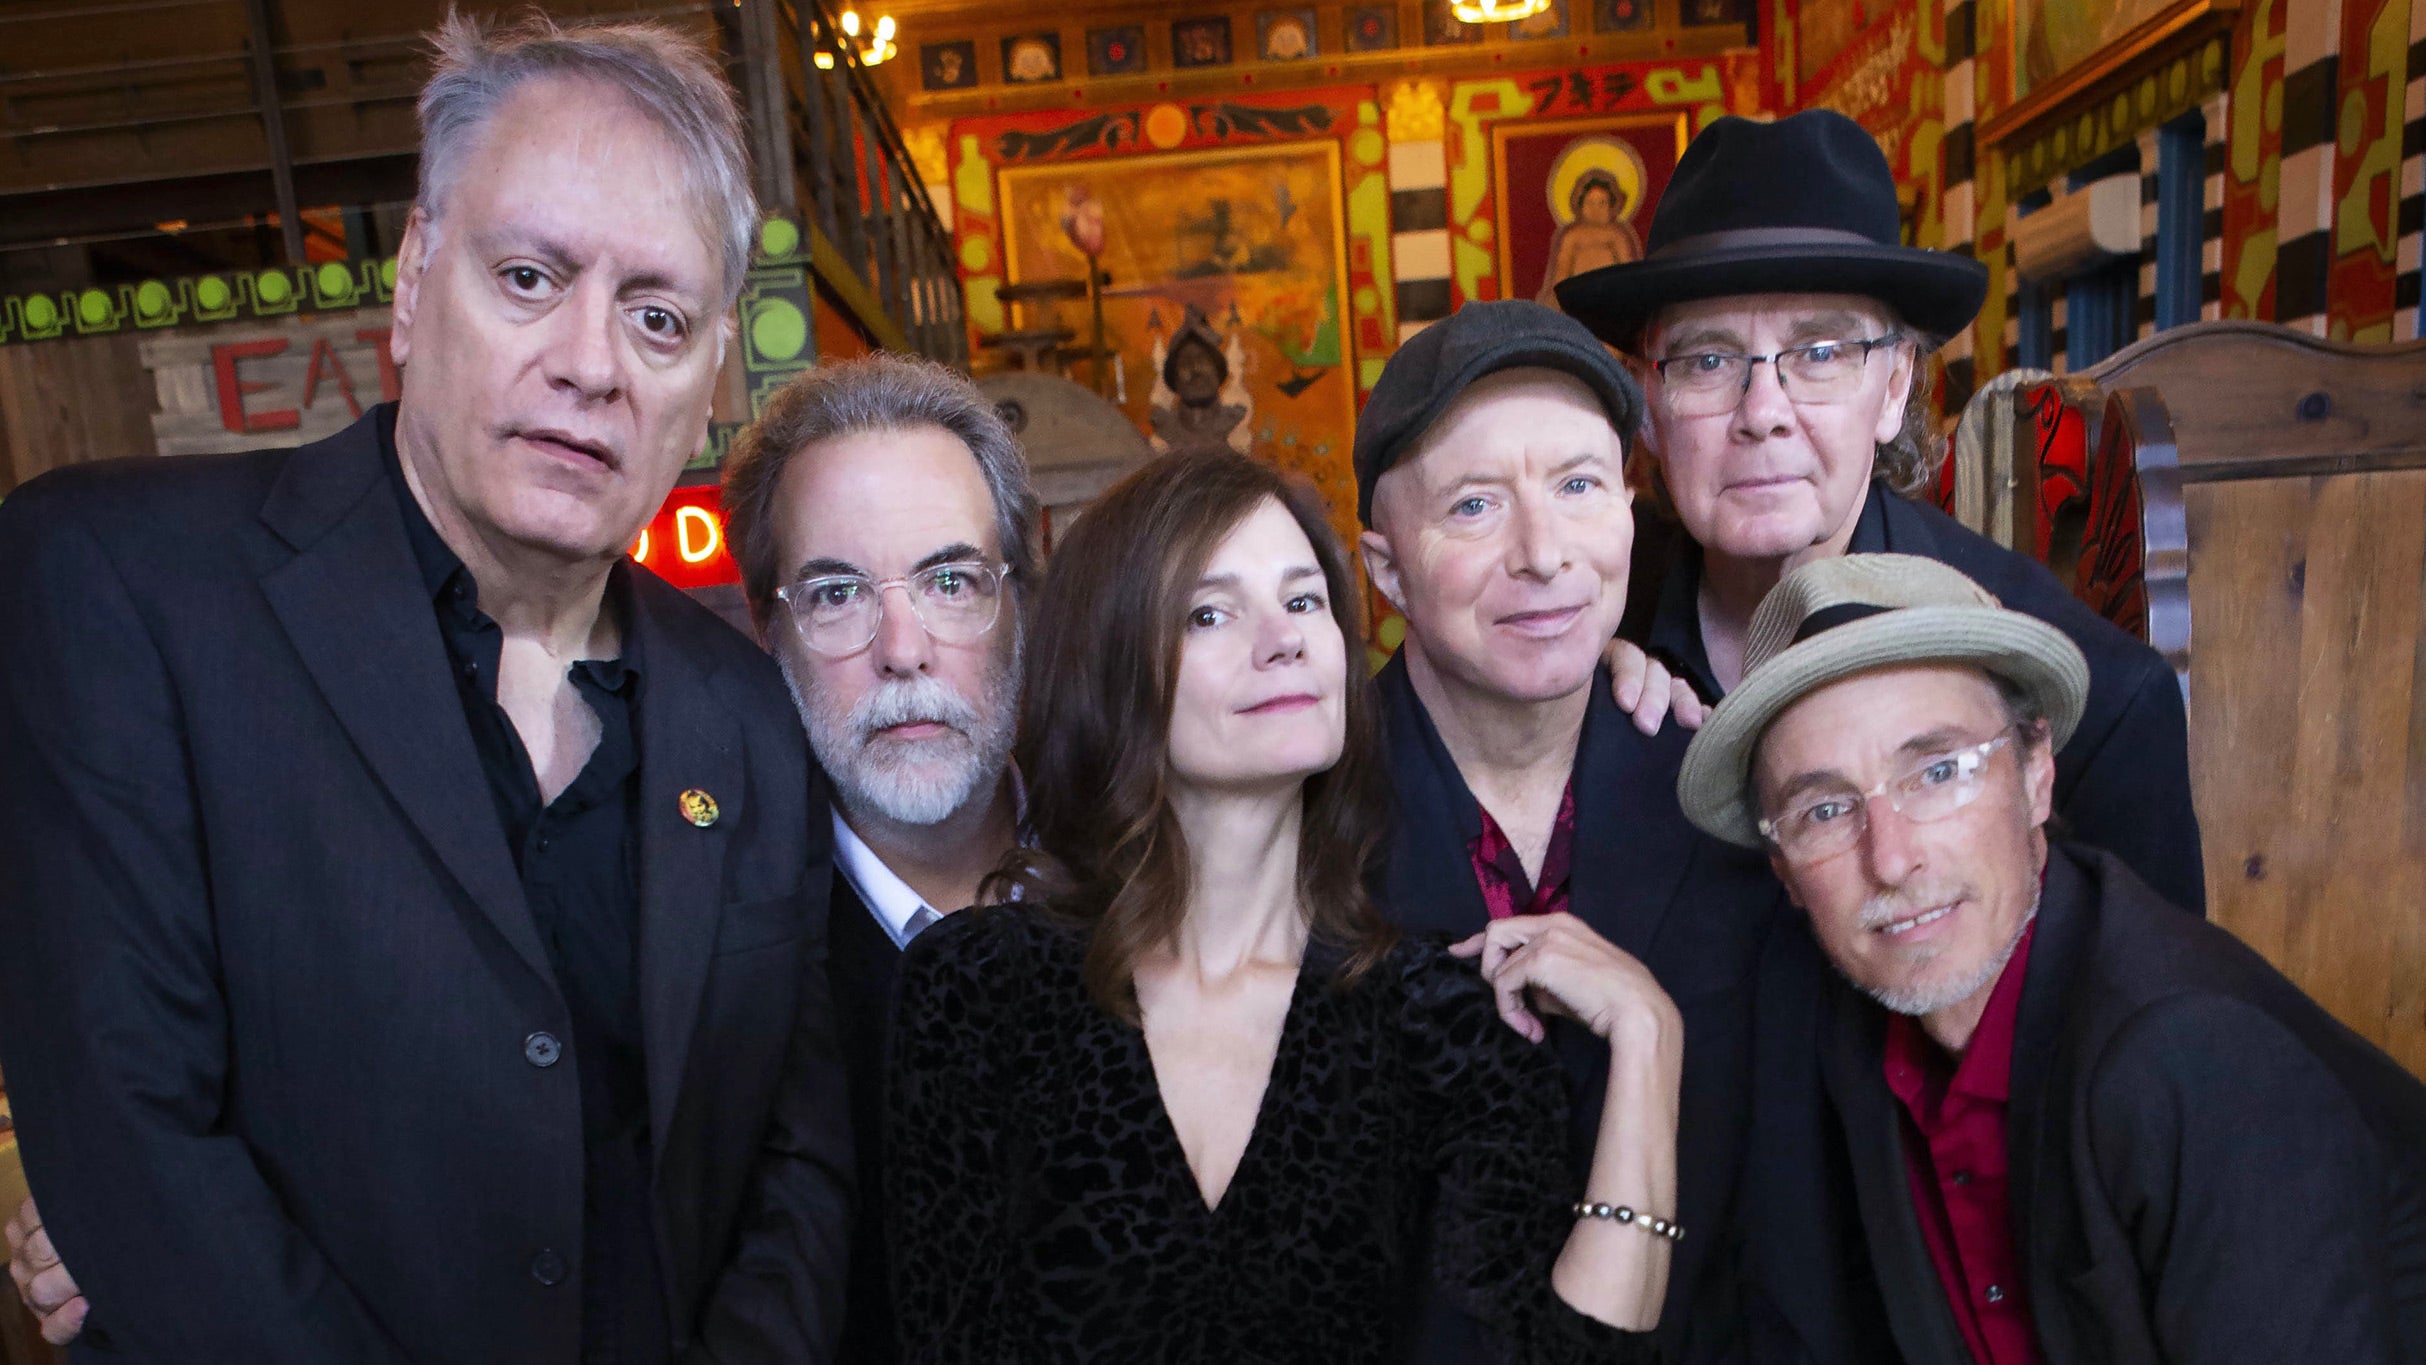 10,000 Maniacs at Birchmere